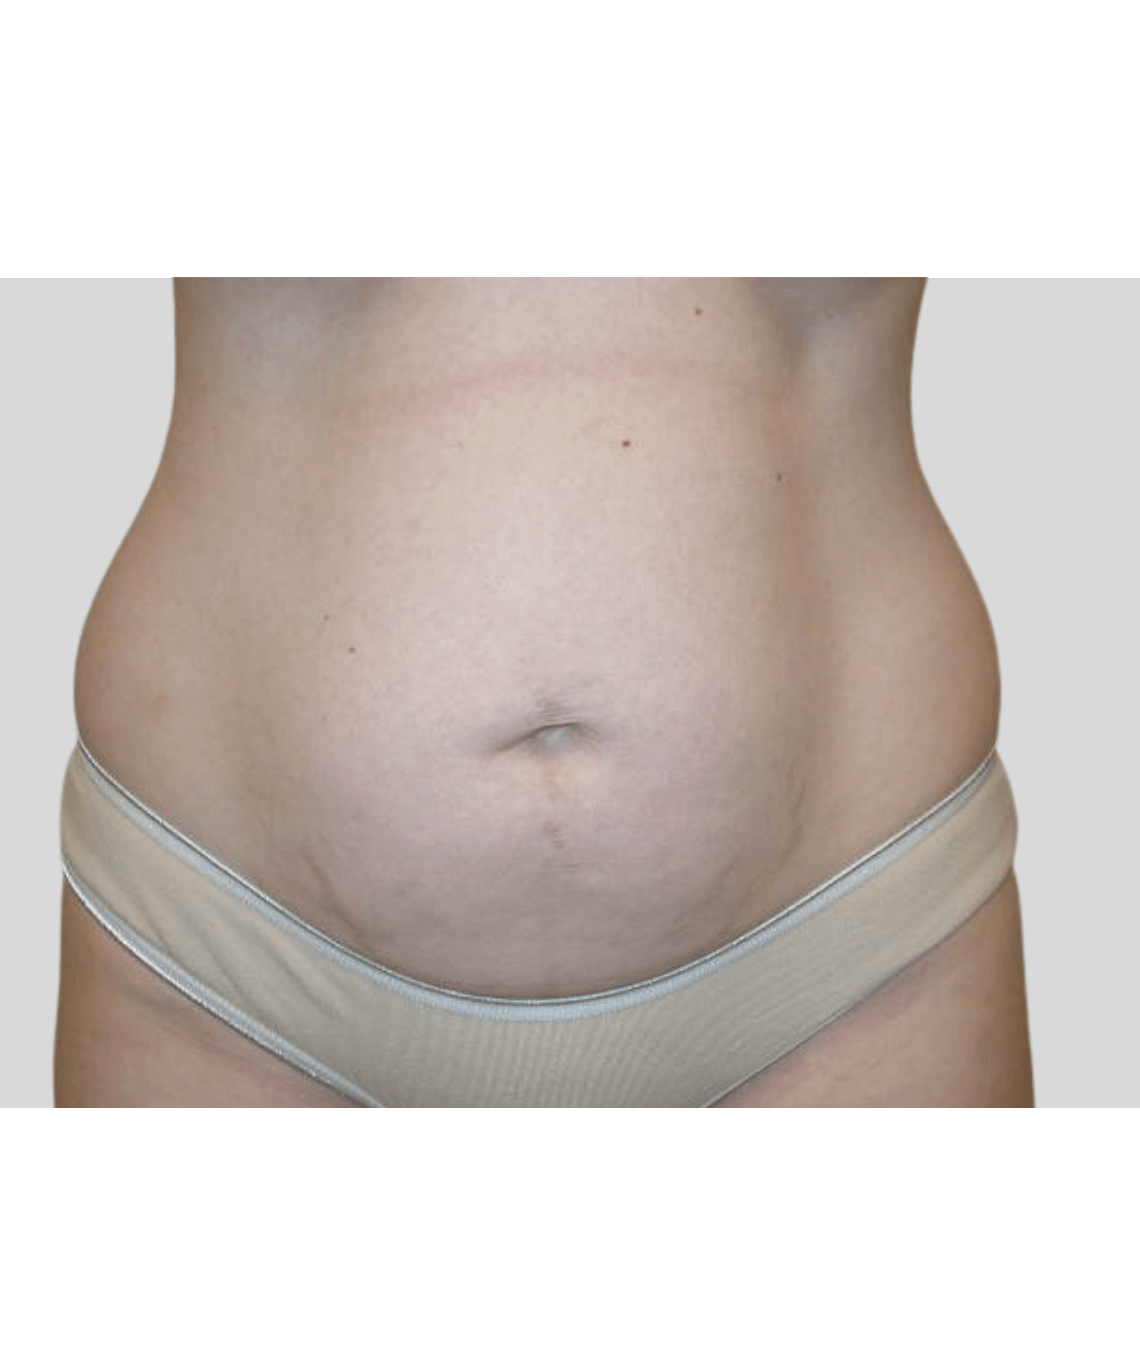 liposuction - before and after photos - prma plastic surgery - case 43